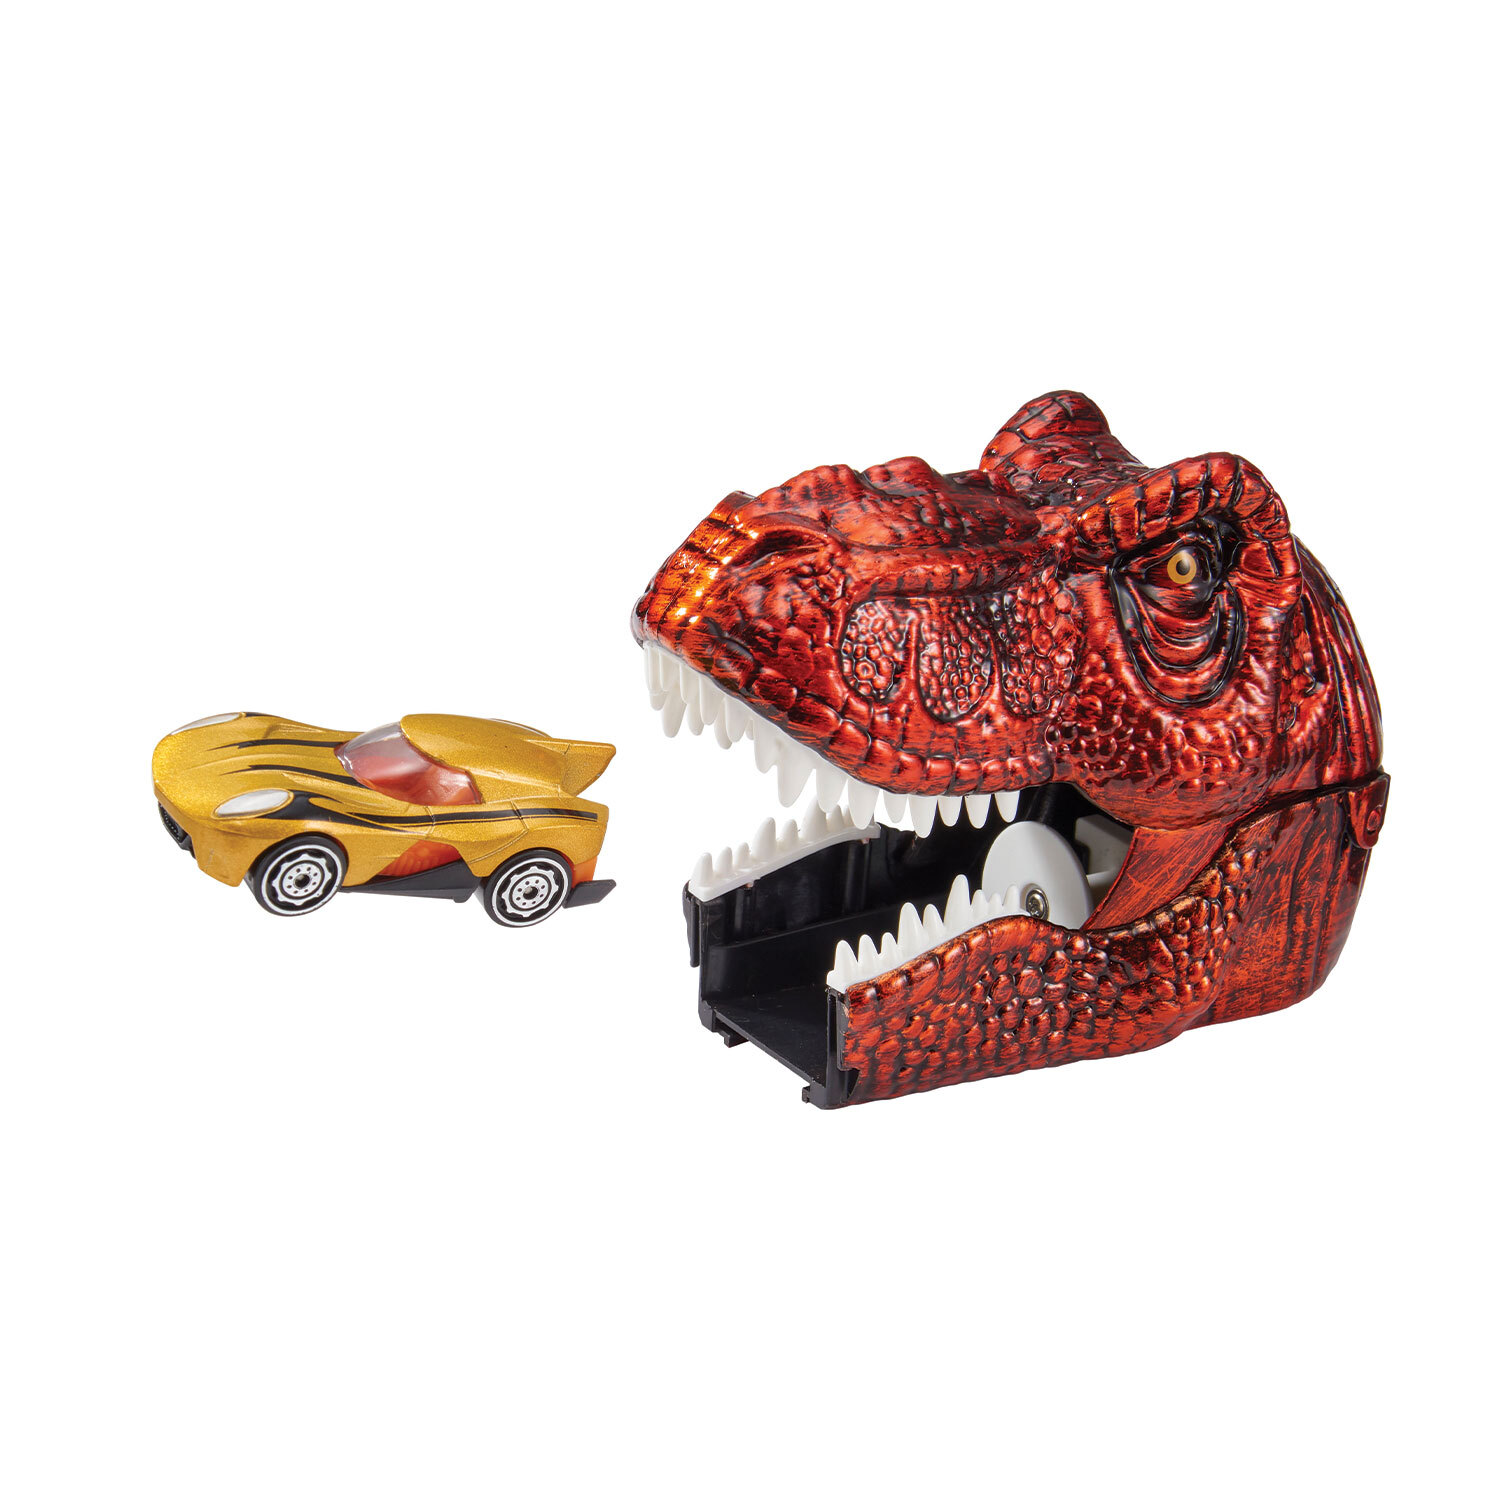 Single Teamsterz Dinosaur Launcher and Car Set in Assorted styles Image 3